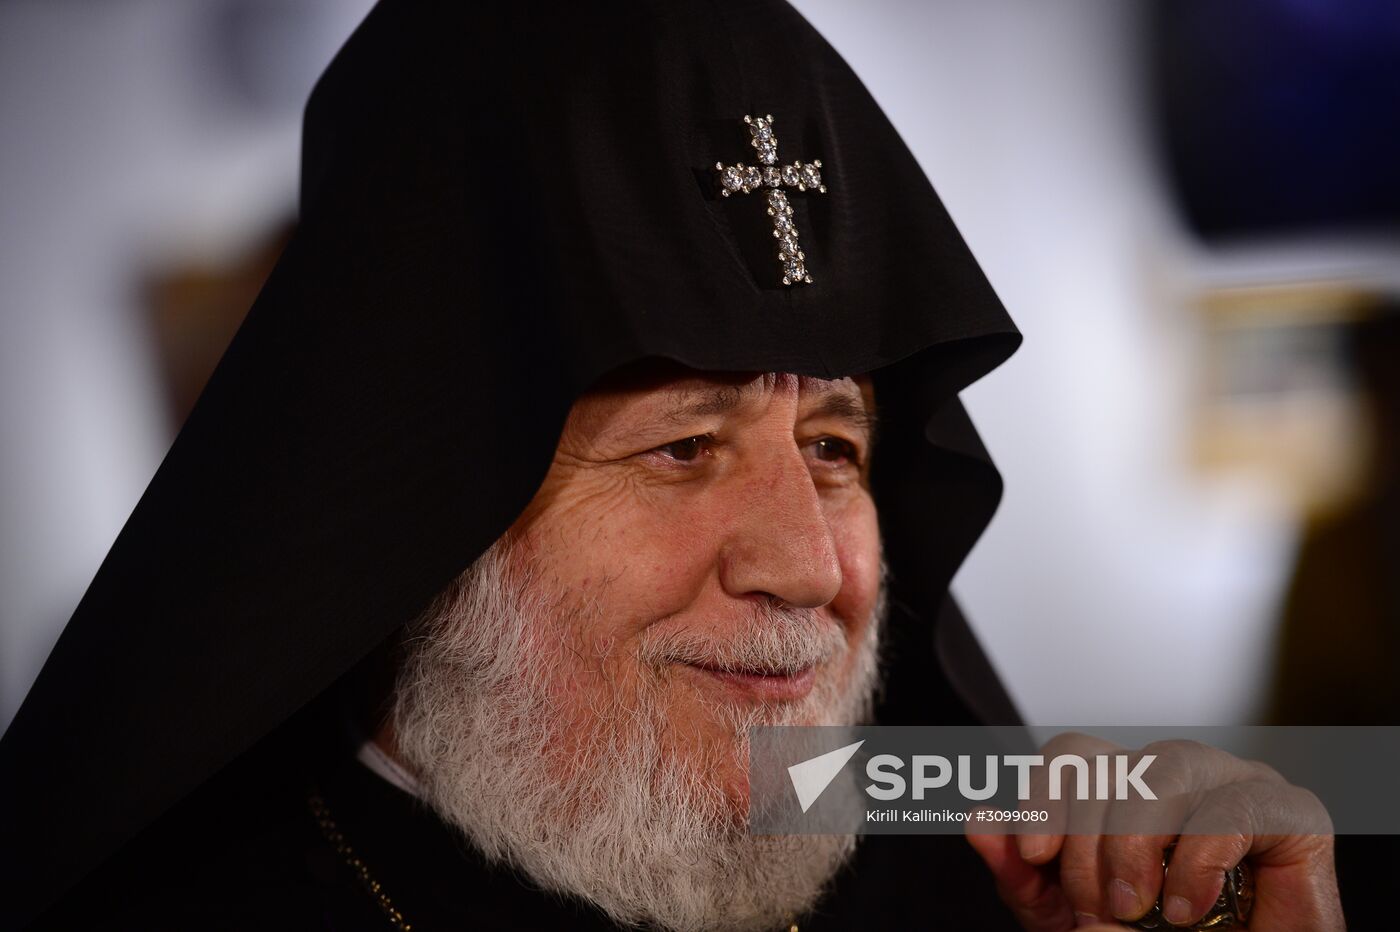 Supreme Patriarch and Catholicos of All Armenians Karekin II arrives in Moscow